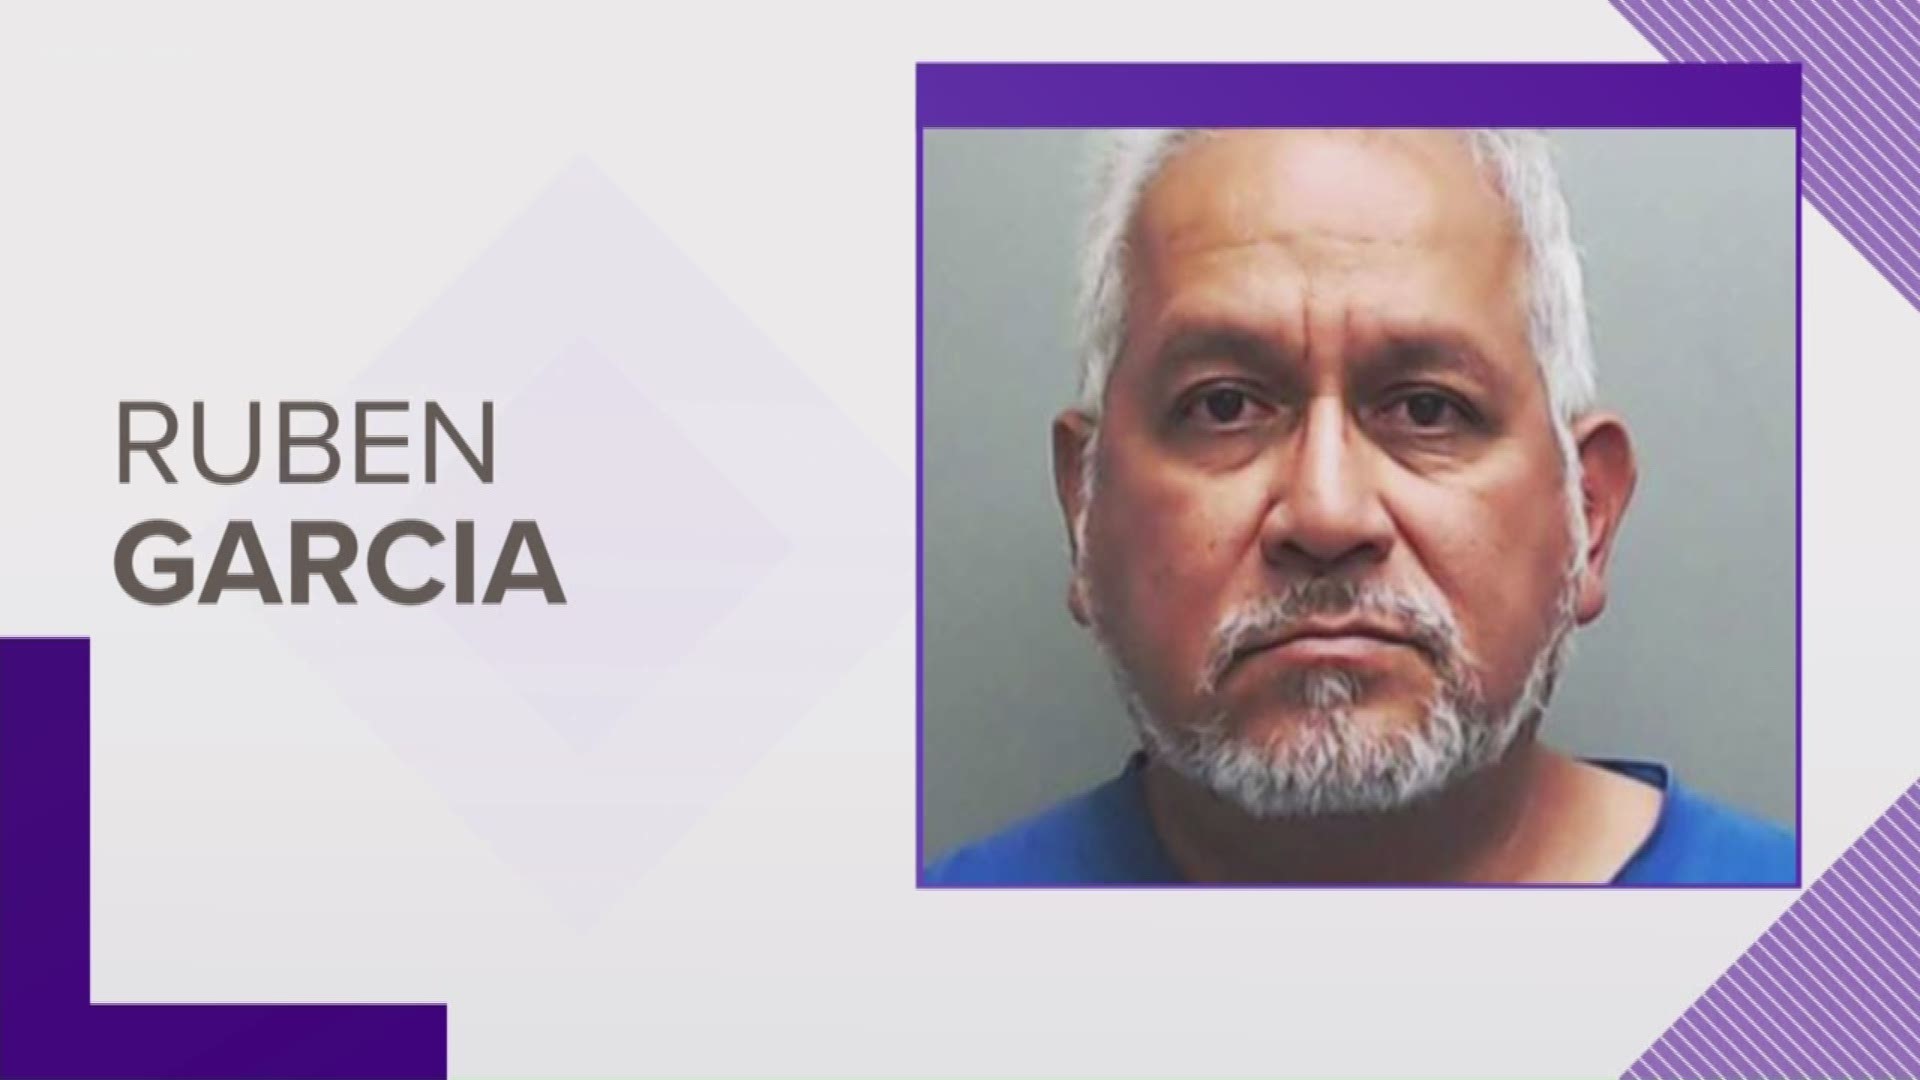 An East Austin pastor accused of sexually assaulting a child won't go to prison.